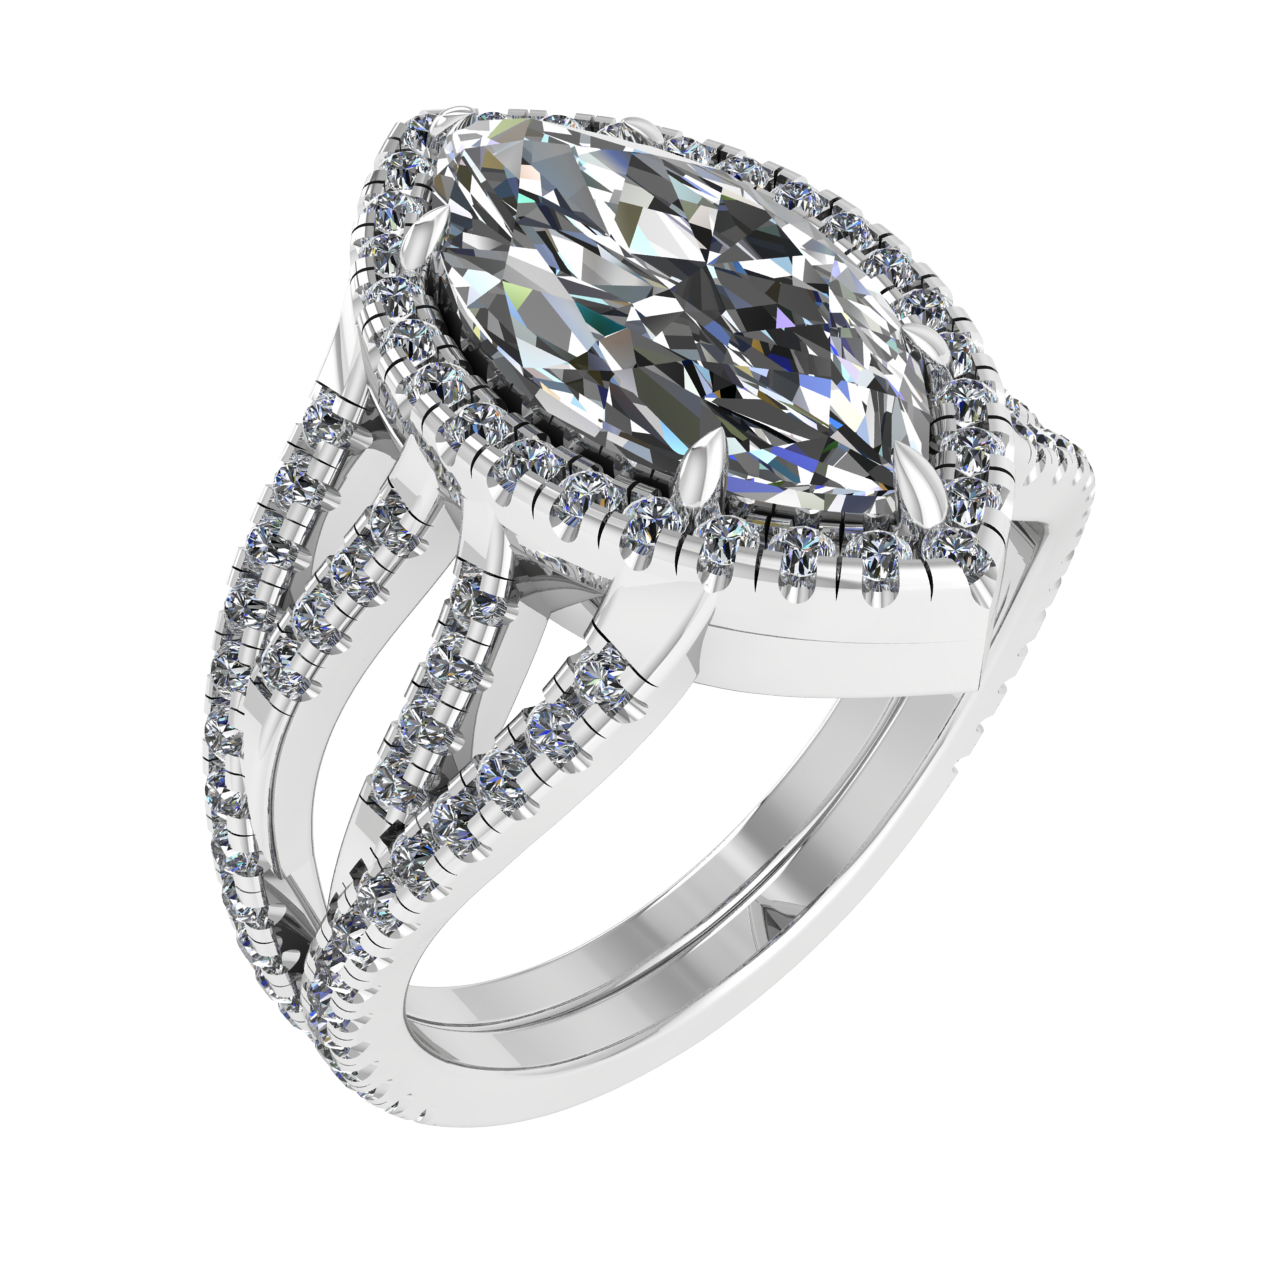 DESIGNER 14.00mm x 7.00mm MARQUISE ENGAGEMENT RING